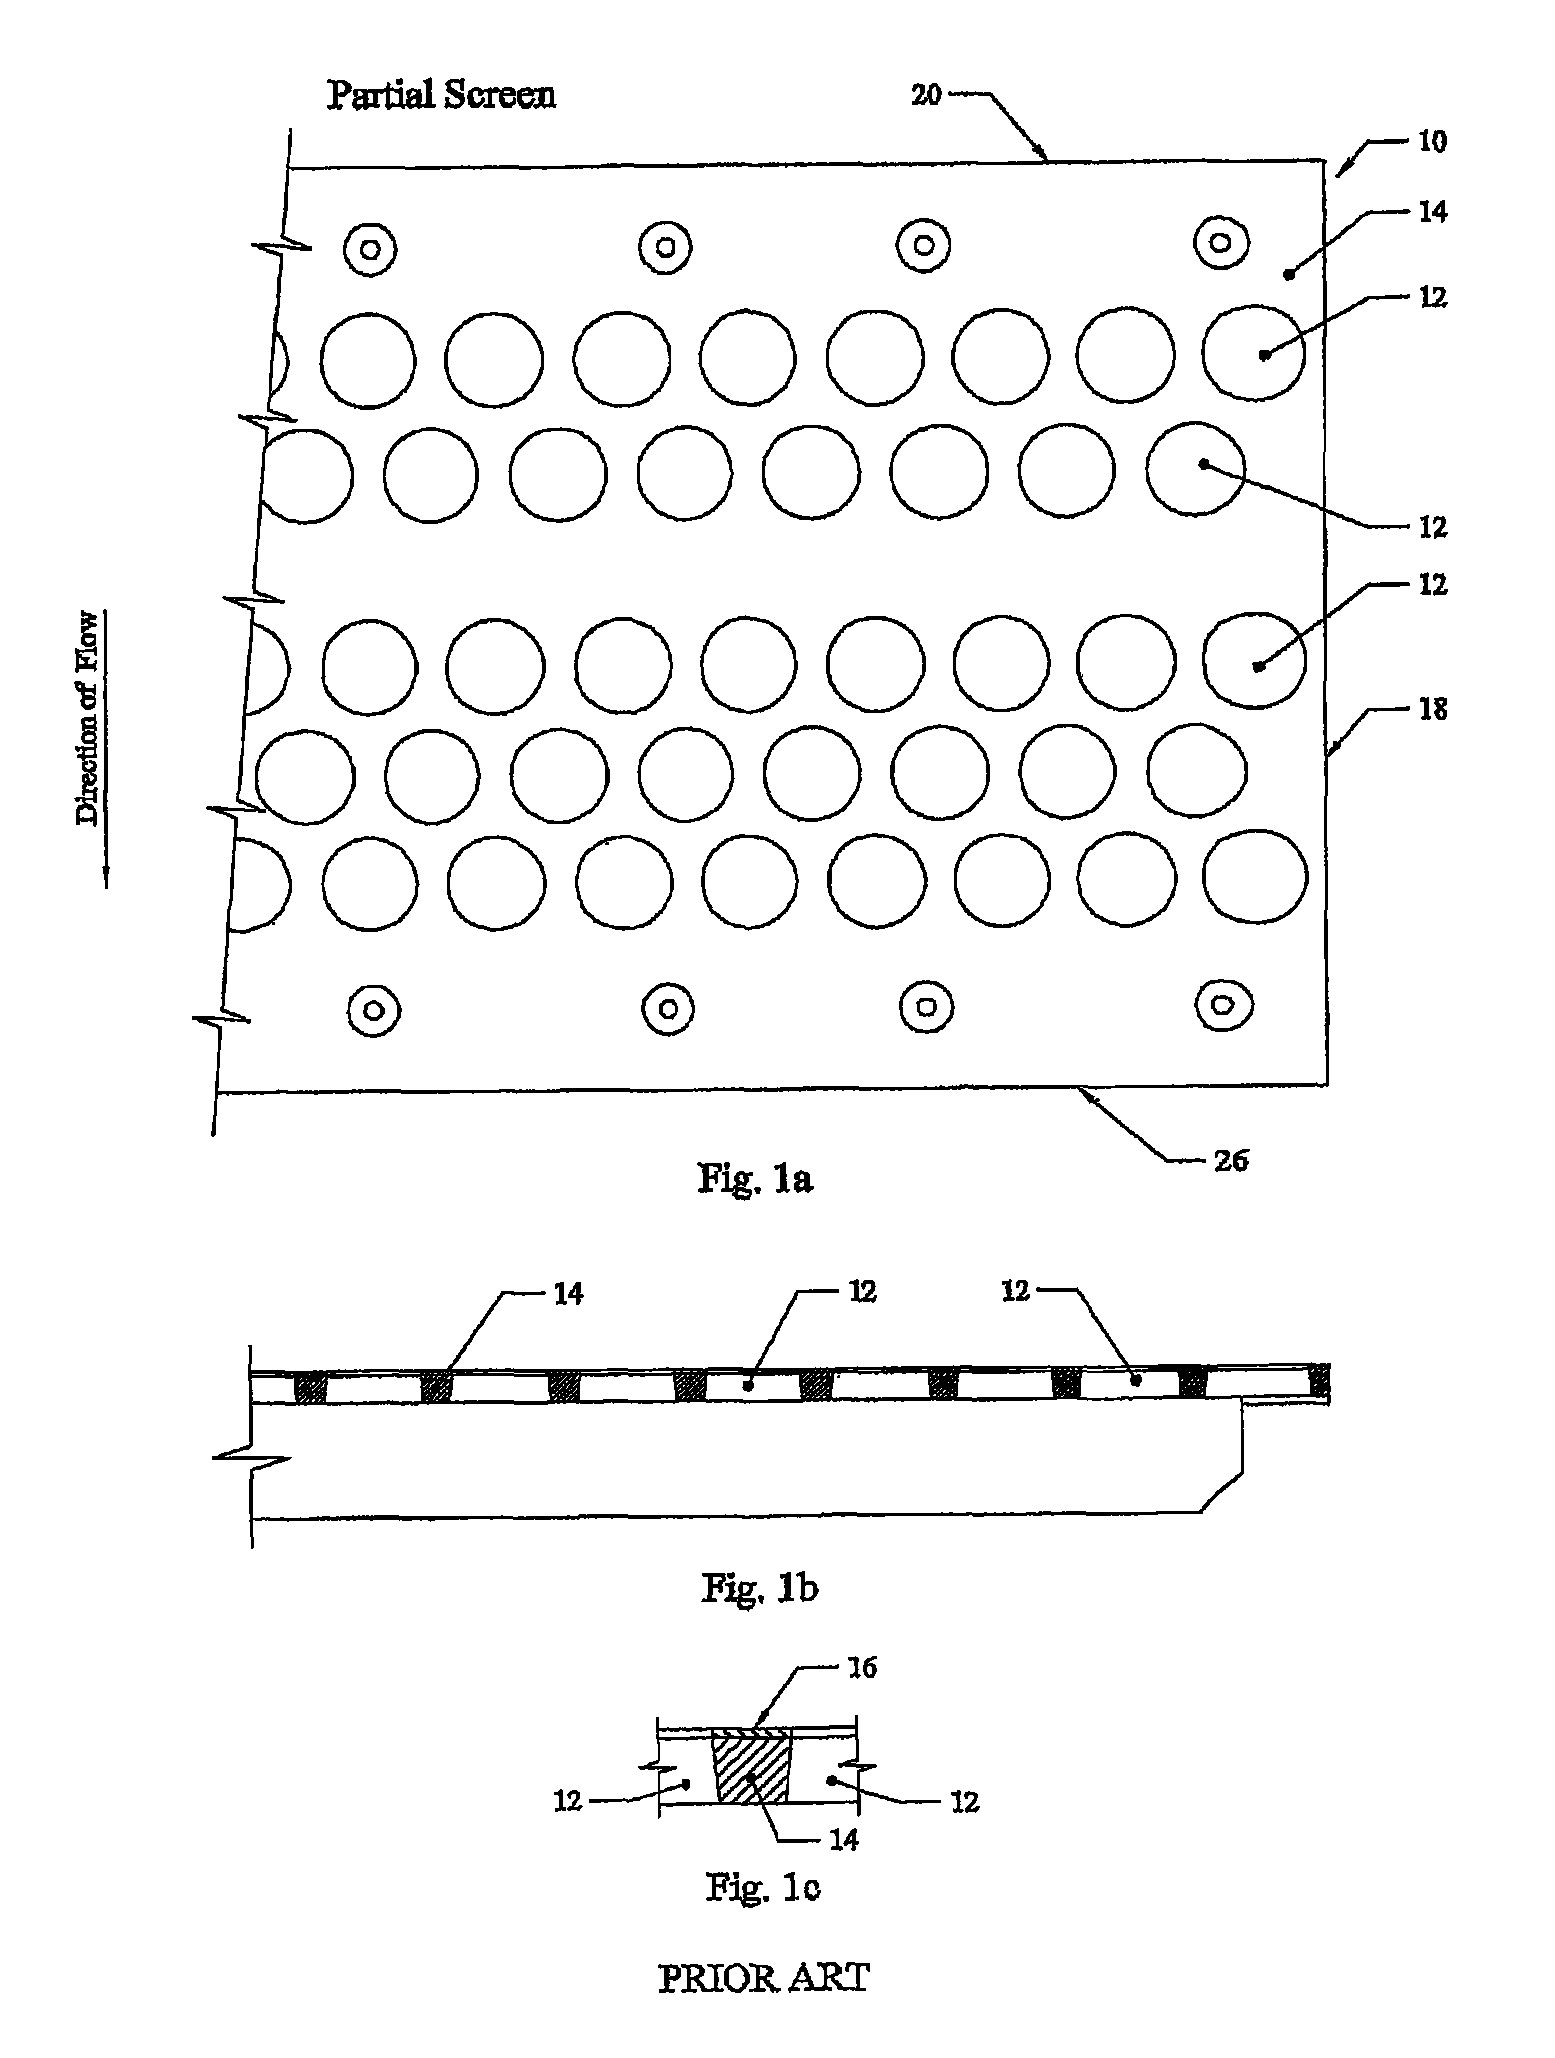 Screen cloth for vibrating or stationary screens